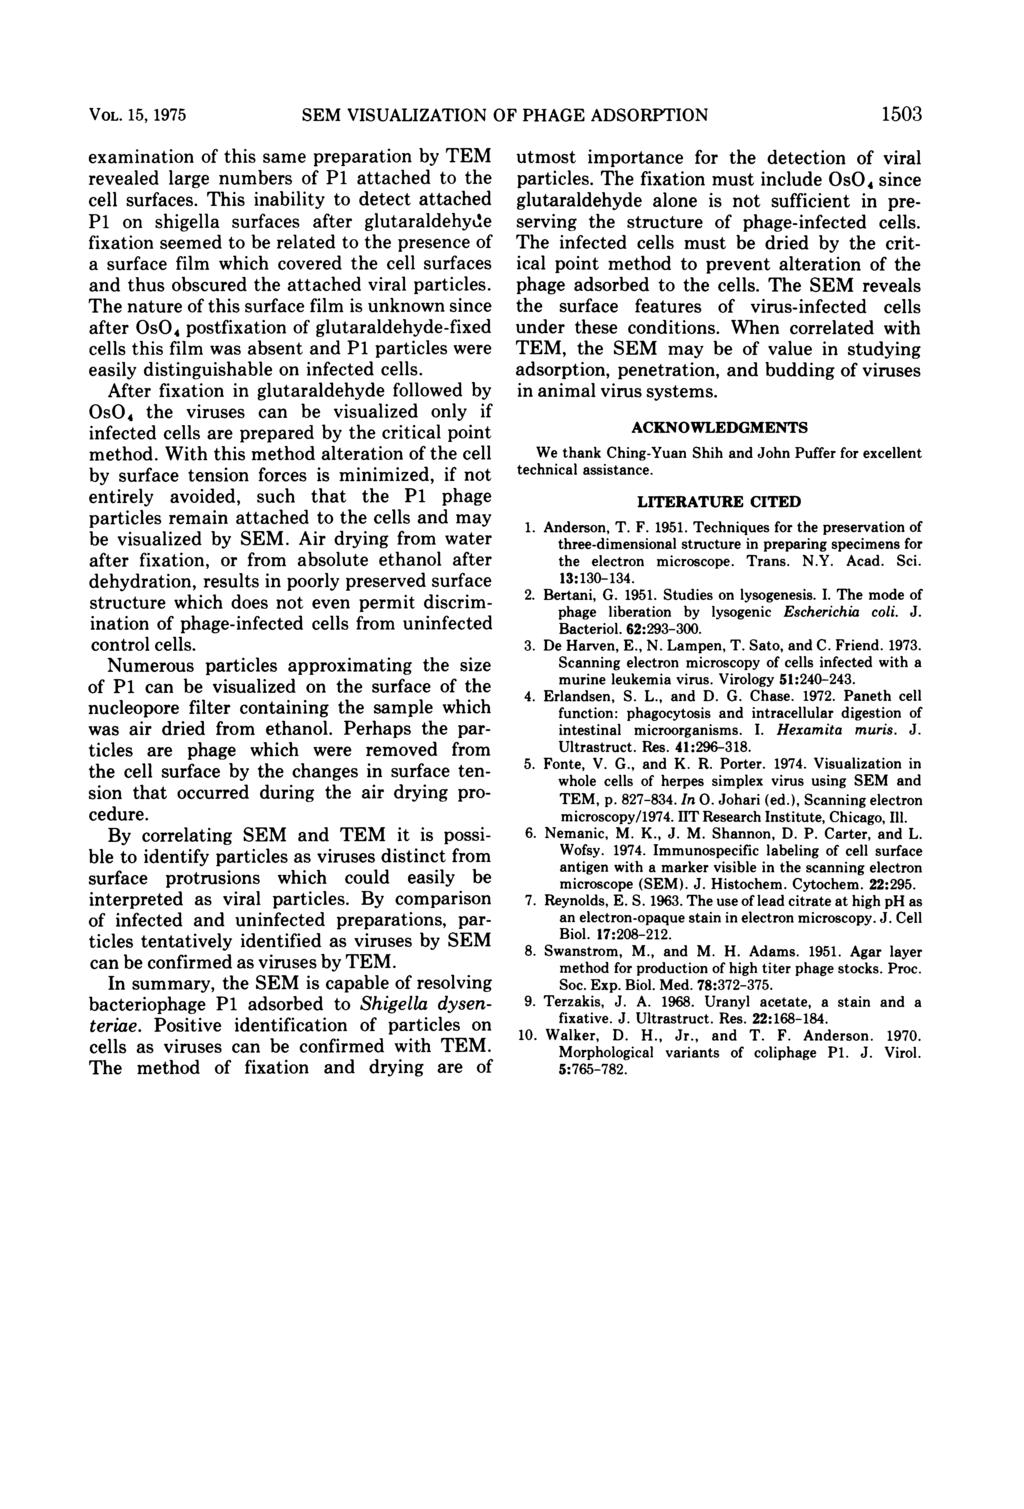 VOL. 15, 1975 SEM VISUALIZATION OF PHAGE ADSORPTION 1503 examination of this same preparation by TEM revealed large numbers of P1 attached to the cell surfaces.